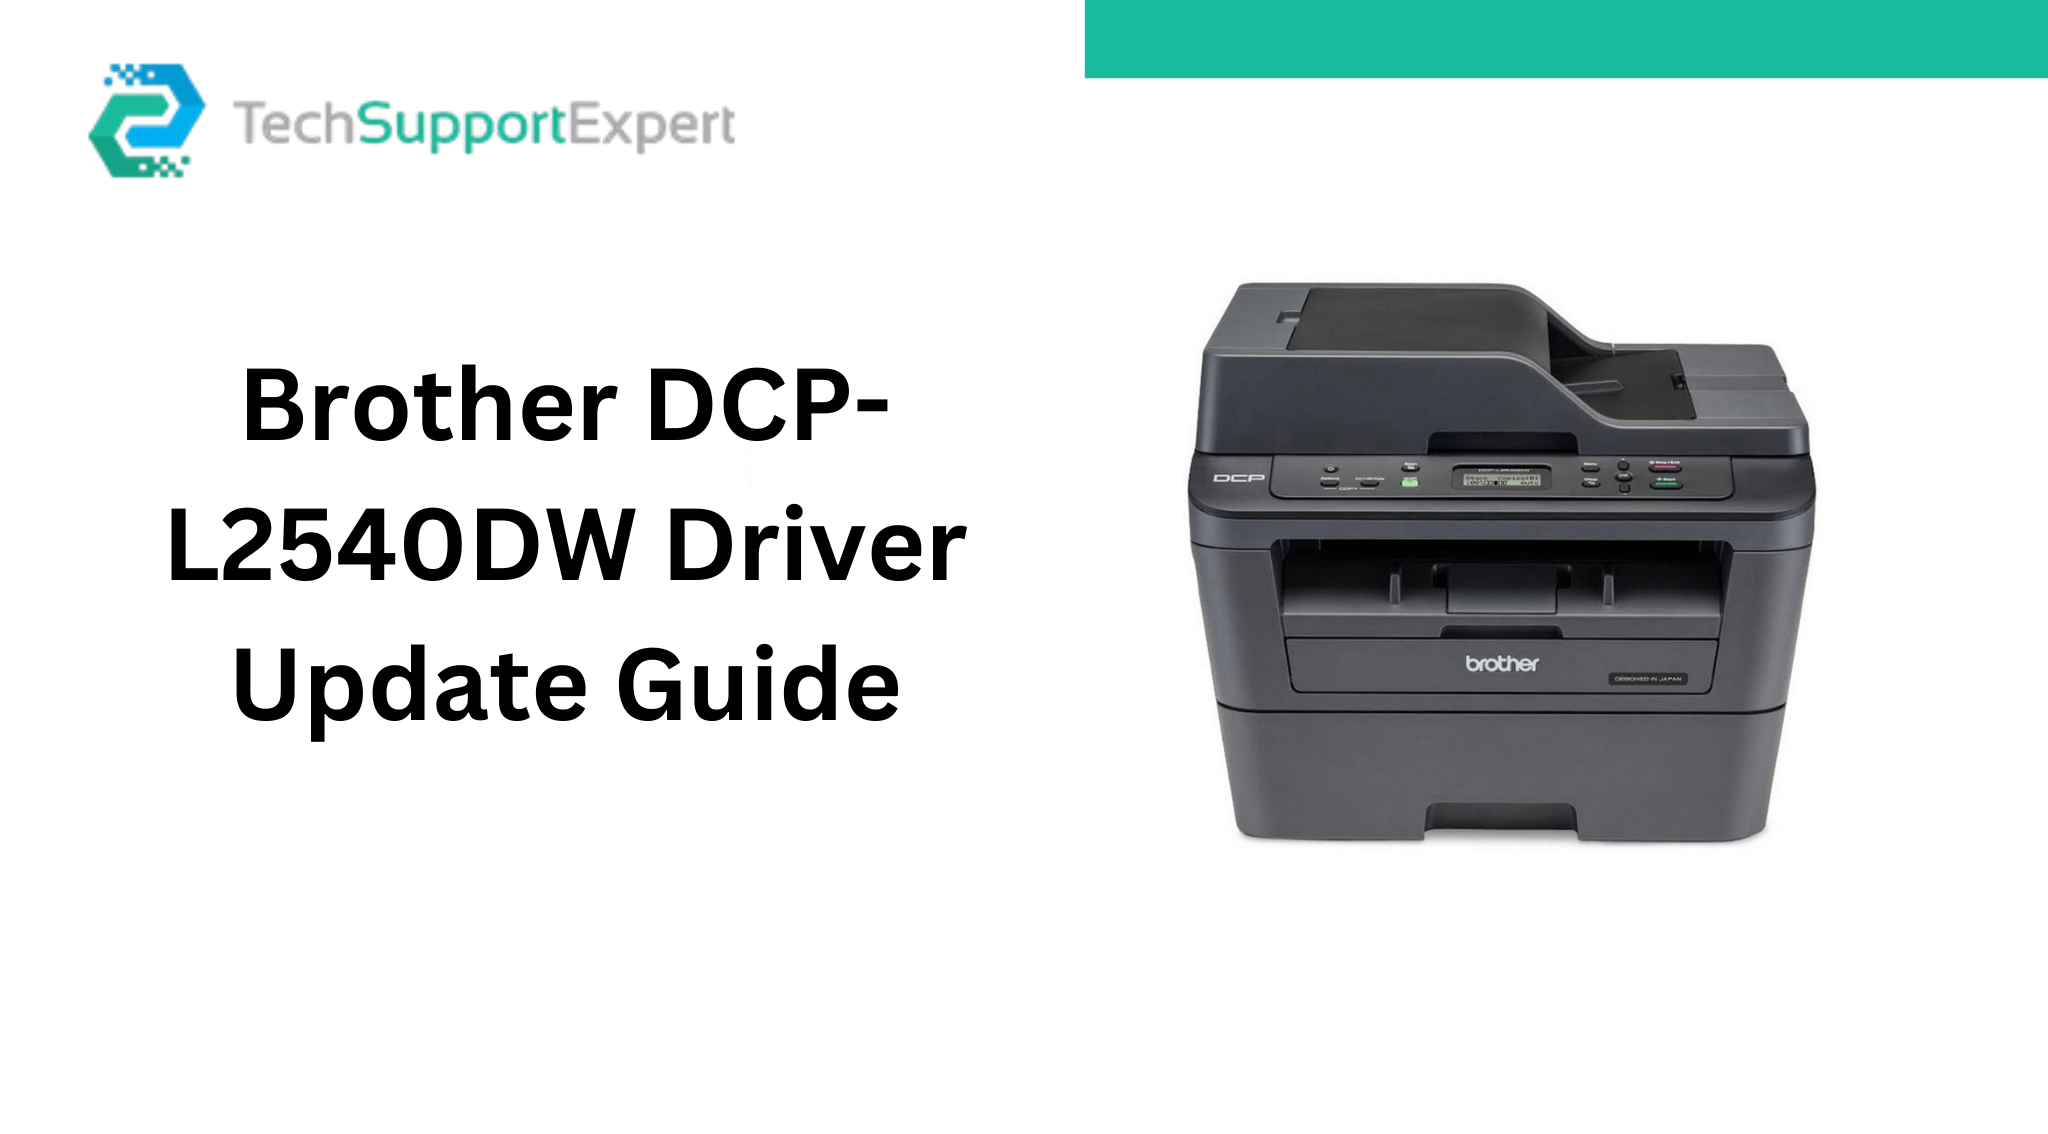 How to Download and Update Brother DCP-L2540DW Driver